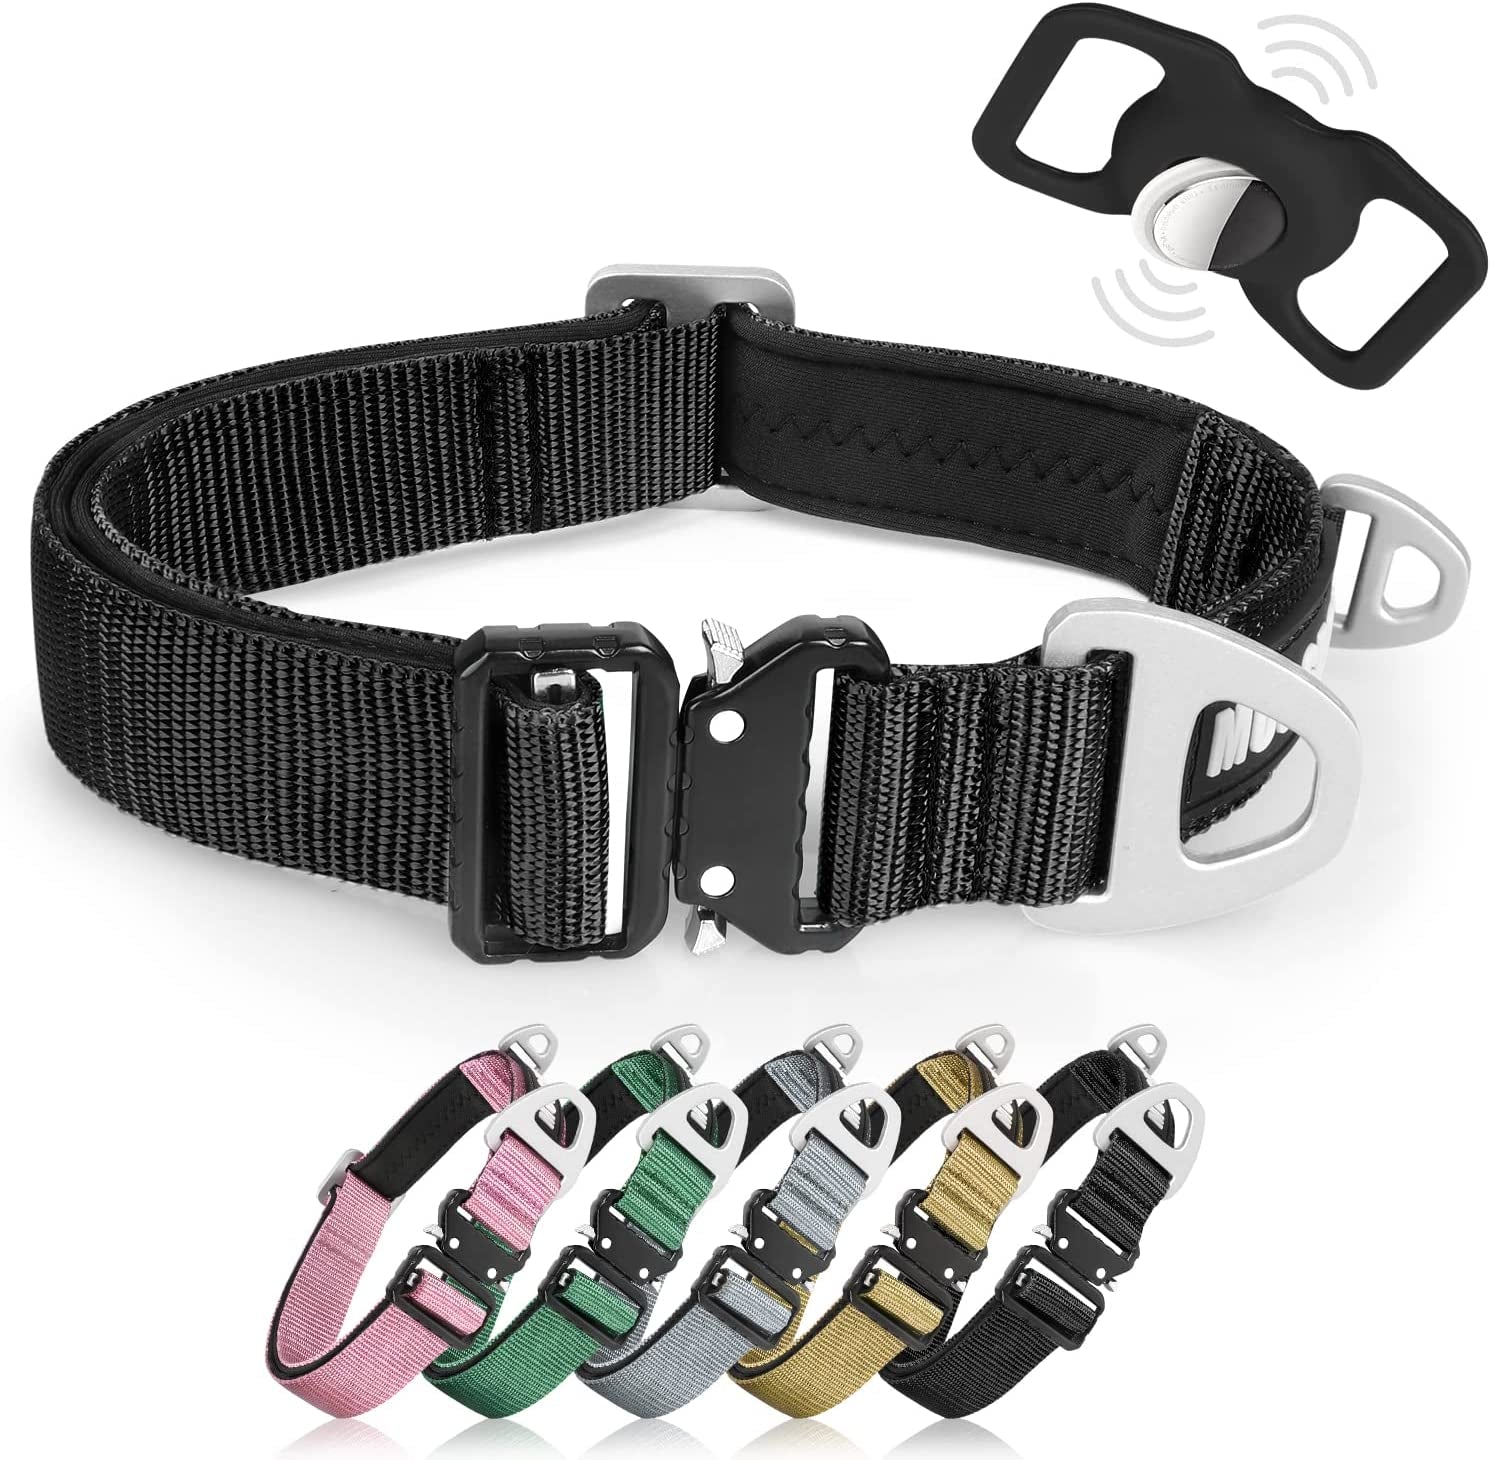 MOOGROU Dog Collar with Airtag Holder,Quick-Release Metal Buckle Heavy Duty Pet Collar for Small Medium Large Dogs,Premium Adjustable Nylon Airtag Dog Collar with Soft Neoprene Padded Comfy 1"1.2"1.5"